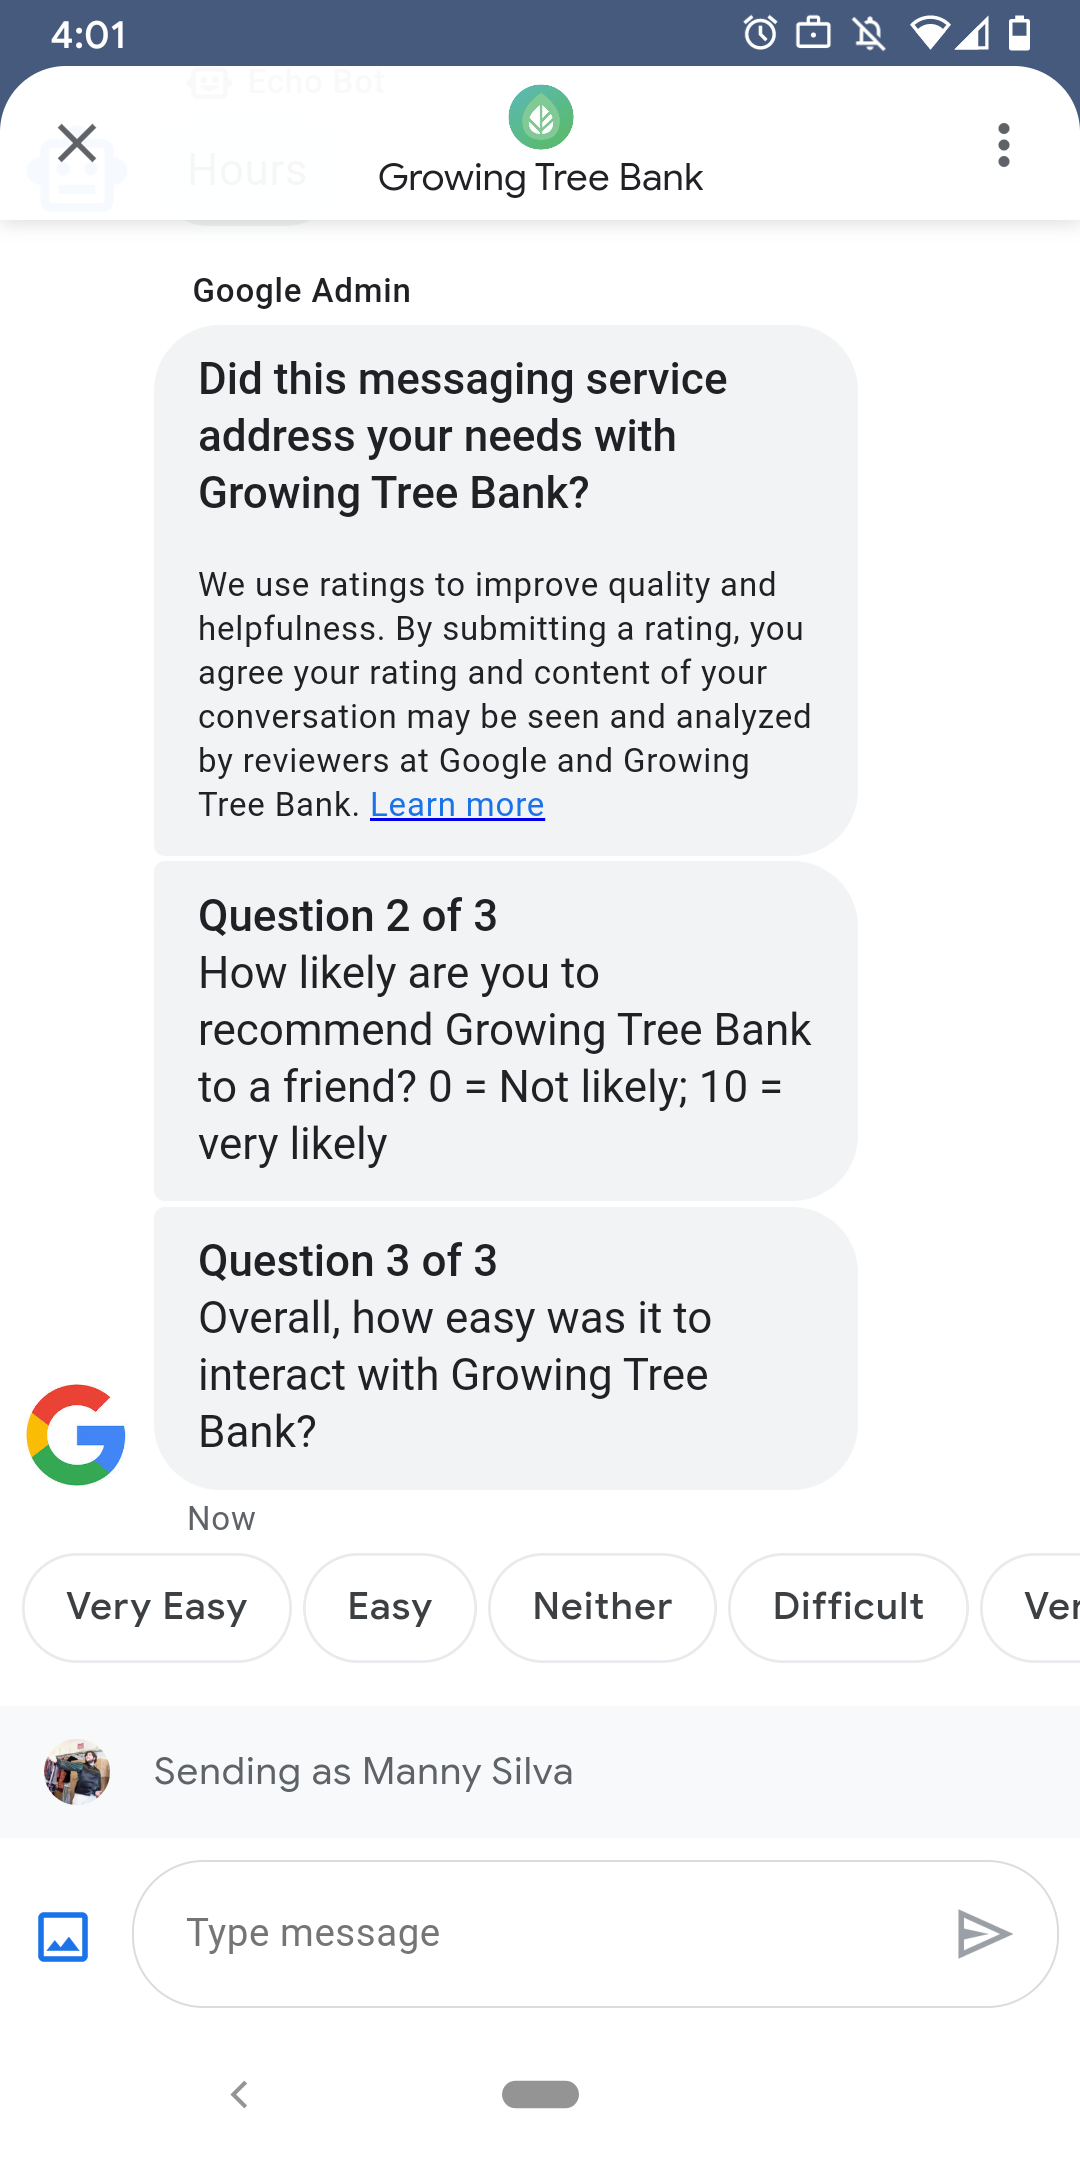 A customized survey in a Business Messages conversation.